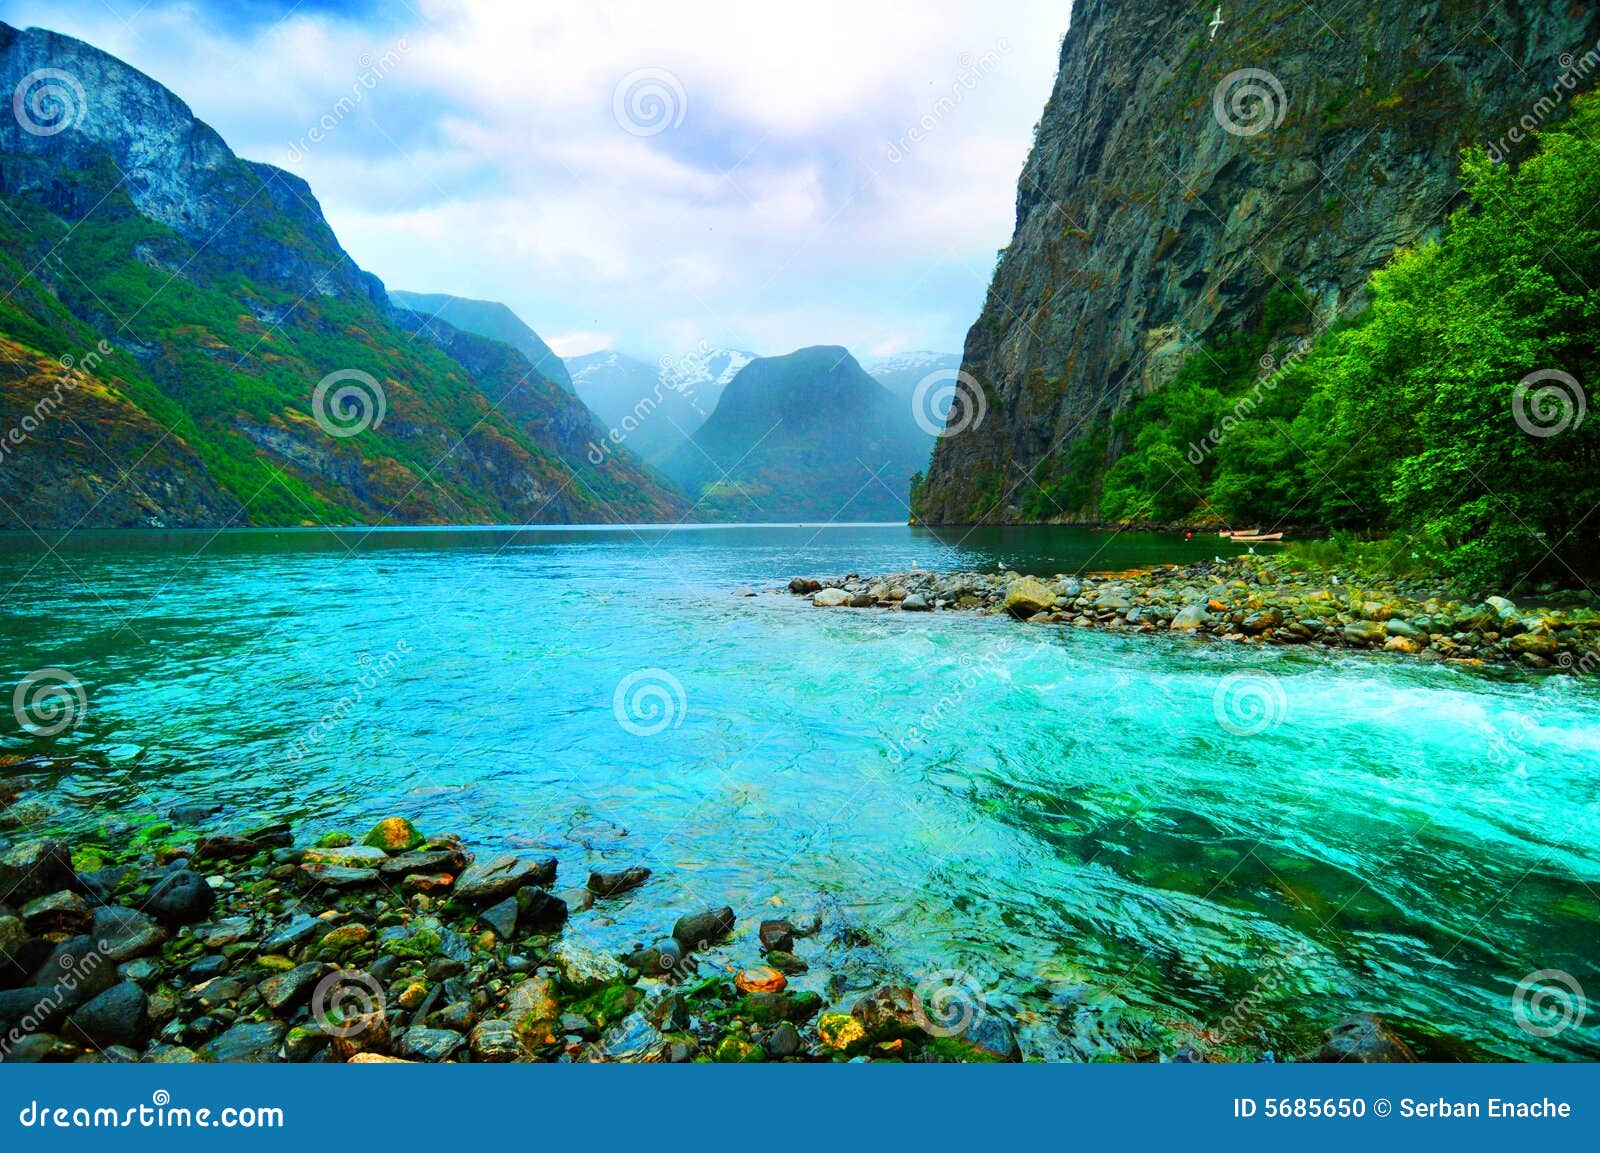 108 340 Fjord Norway Photos Free Royalty Free Stock Photos From Dreamstime